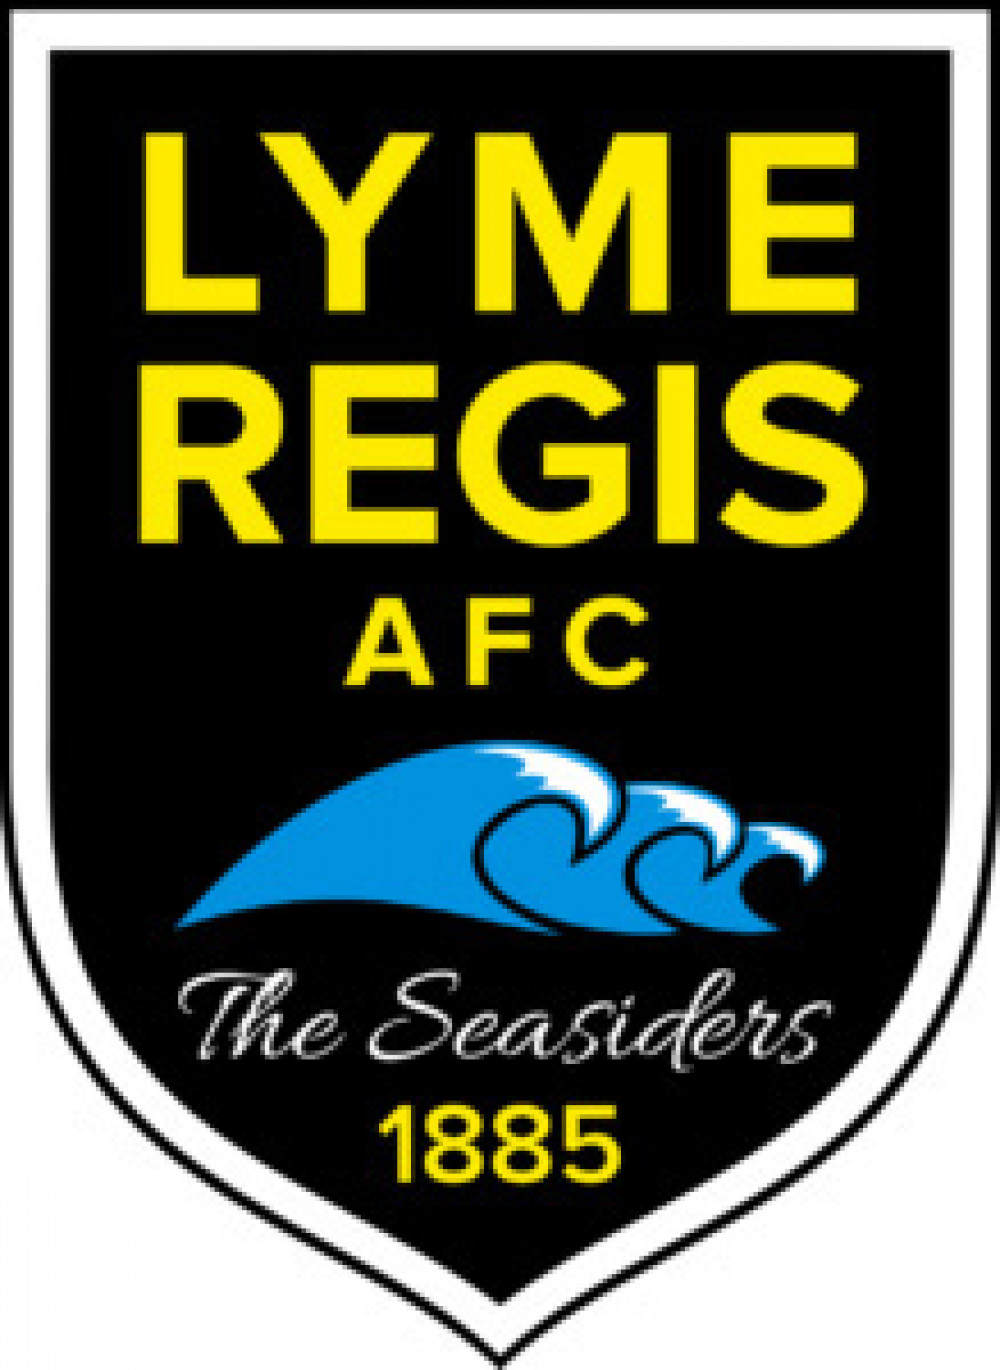 Crucial for Lyme to pick up points in the return fixture against Kentisbeare